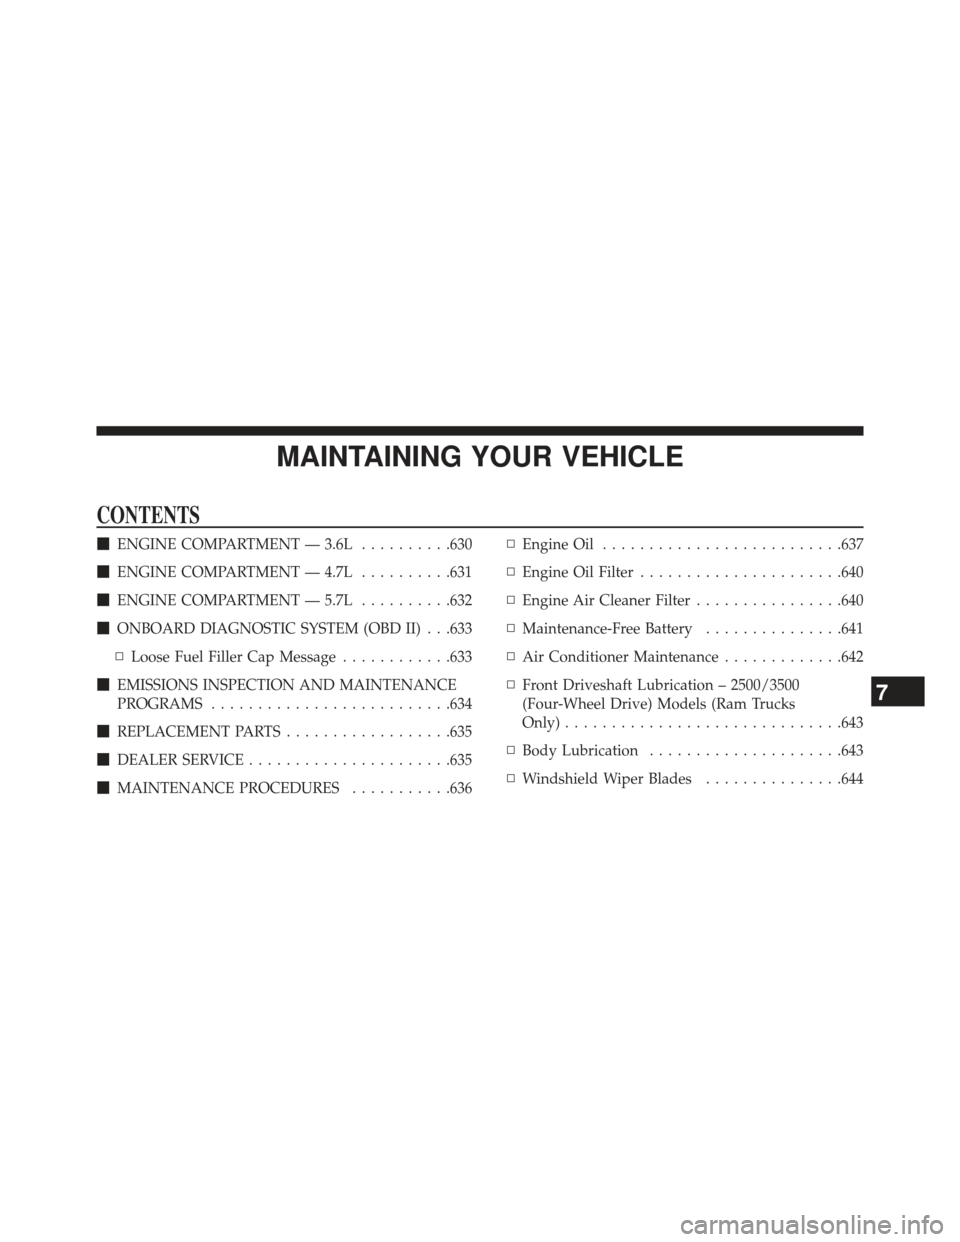 Ram 1500 2013  Owners Manual MAINTAINING YOUR VEHICLE
CONTENTS
ENGINE COMPARTMENT — 3.6L ..........630
 ENGINE COMPARTMENT — 4.7L ..........631
 ENGINE COMPARTMENT — 5.7L ..........632
 ONBOARD DIAGNOSTIC SYSTEM (OBD II